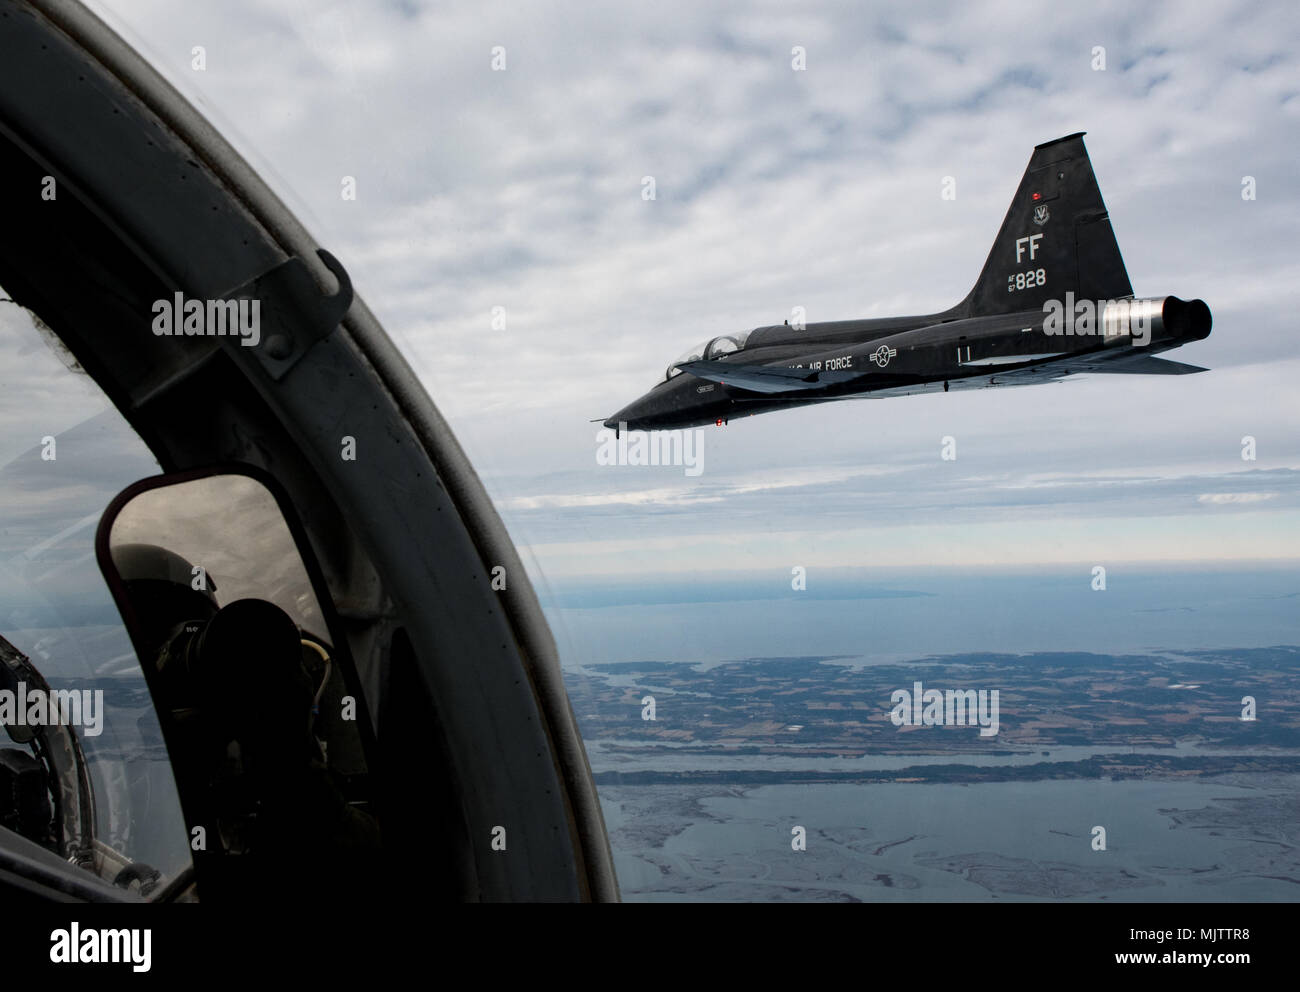 A T-38 Talon from the 71st Fighter Training Squadron flies in formation with another T-38 over Eastern Shore, Va. after participating in a RED AIR mission, Dec. 7, 2017. The 71st FTS, also referred to as the “Ironmen”, is one of three flying squadrons assigned to the 1st Fighter Wing at Joint Base Langley-Eustis, Va..(U.S. Air Force Photo by Staff Sgt. Carlin Leslie) Stock Photo